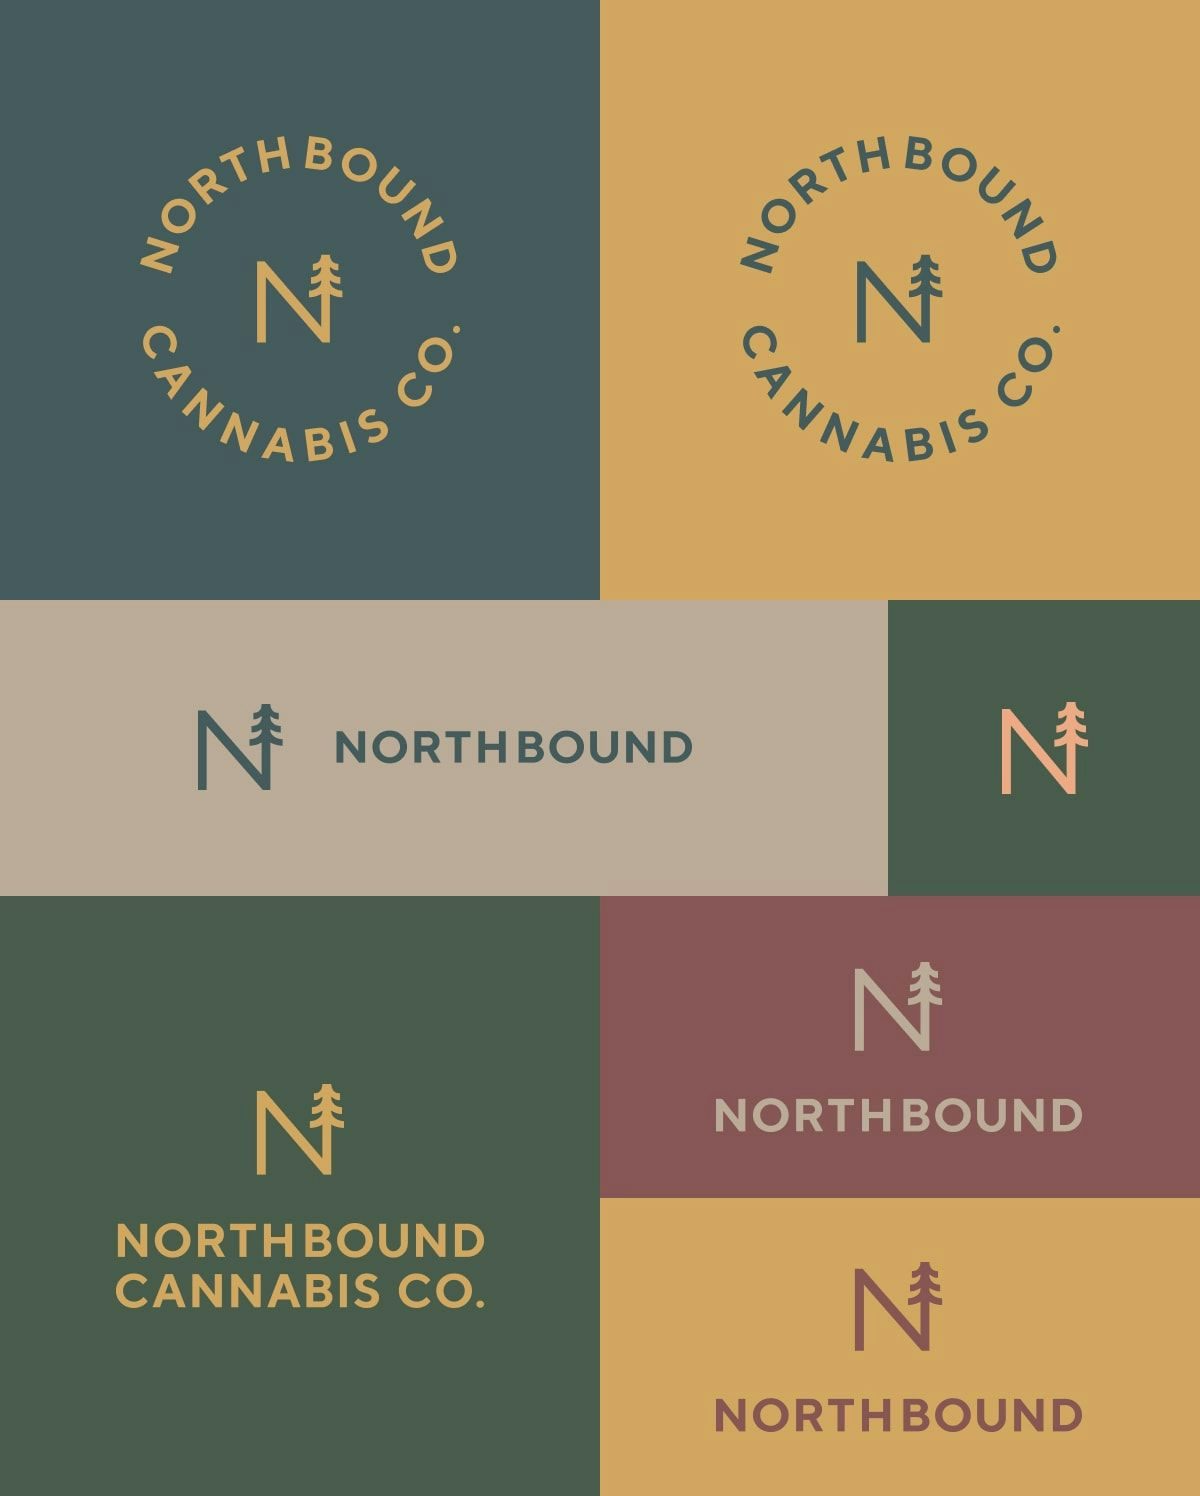 Grid of Northbound Cannabis Co. logo applications using an extended colour palette